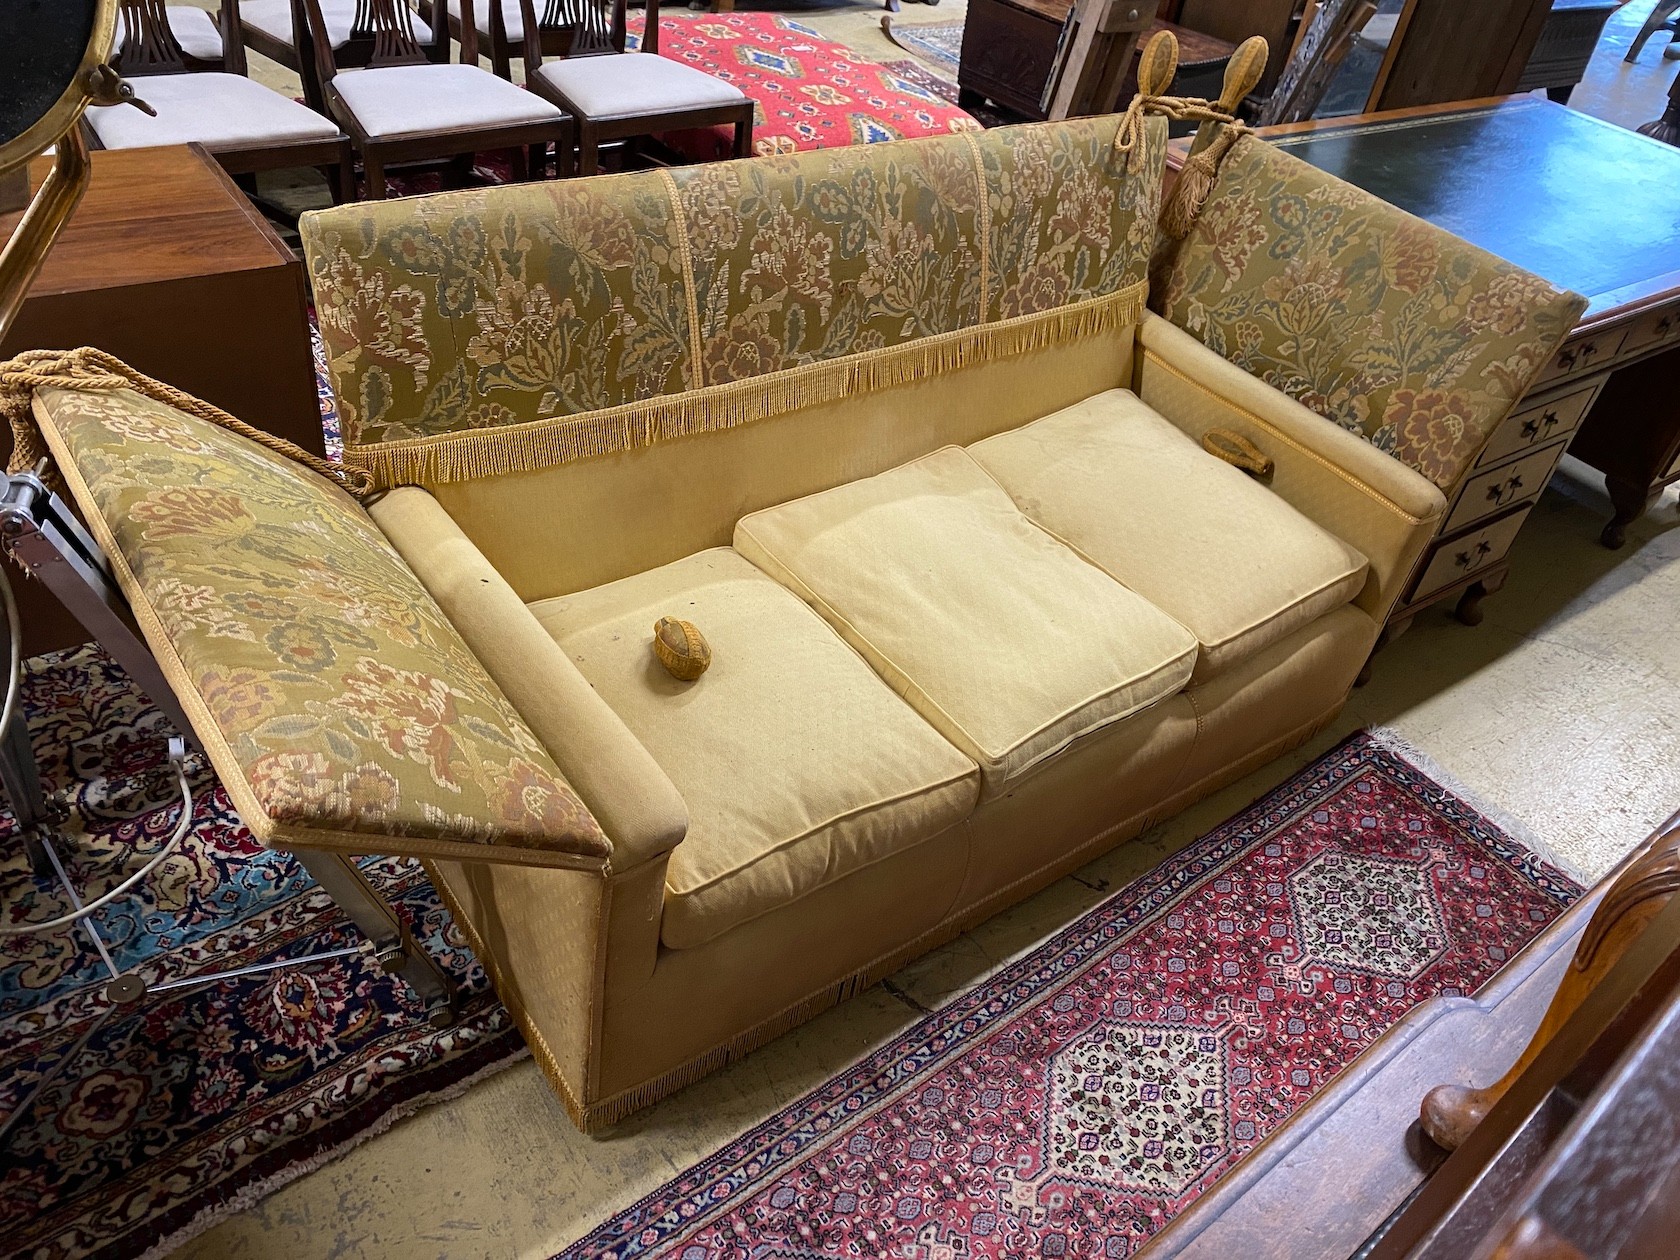 A Knole settee, upholstered in floral brocade, width 186cm, depth 80cm, height 104cm.